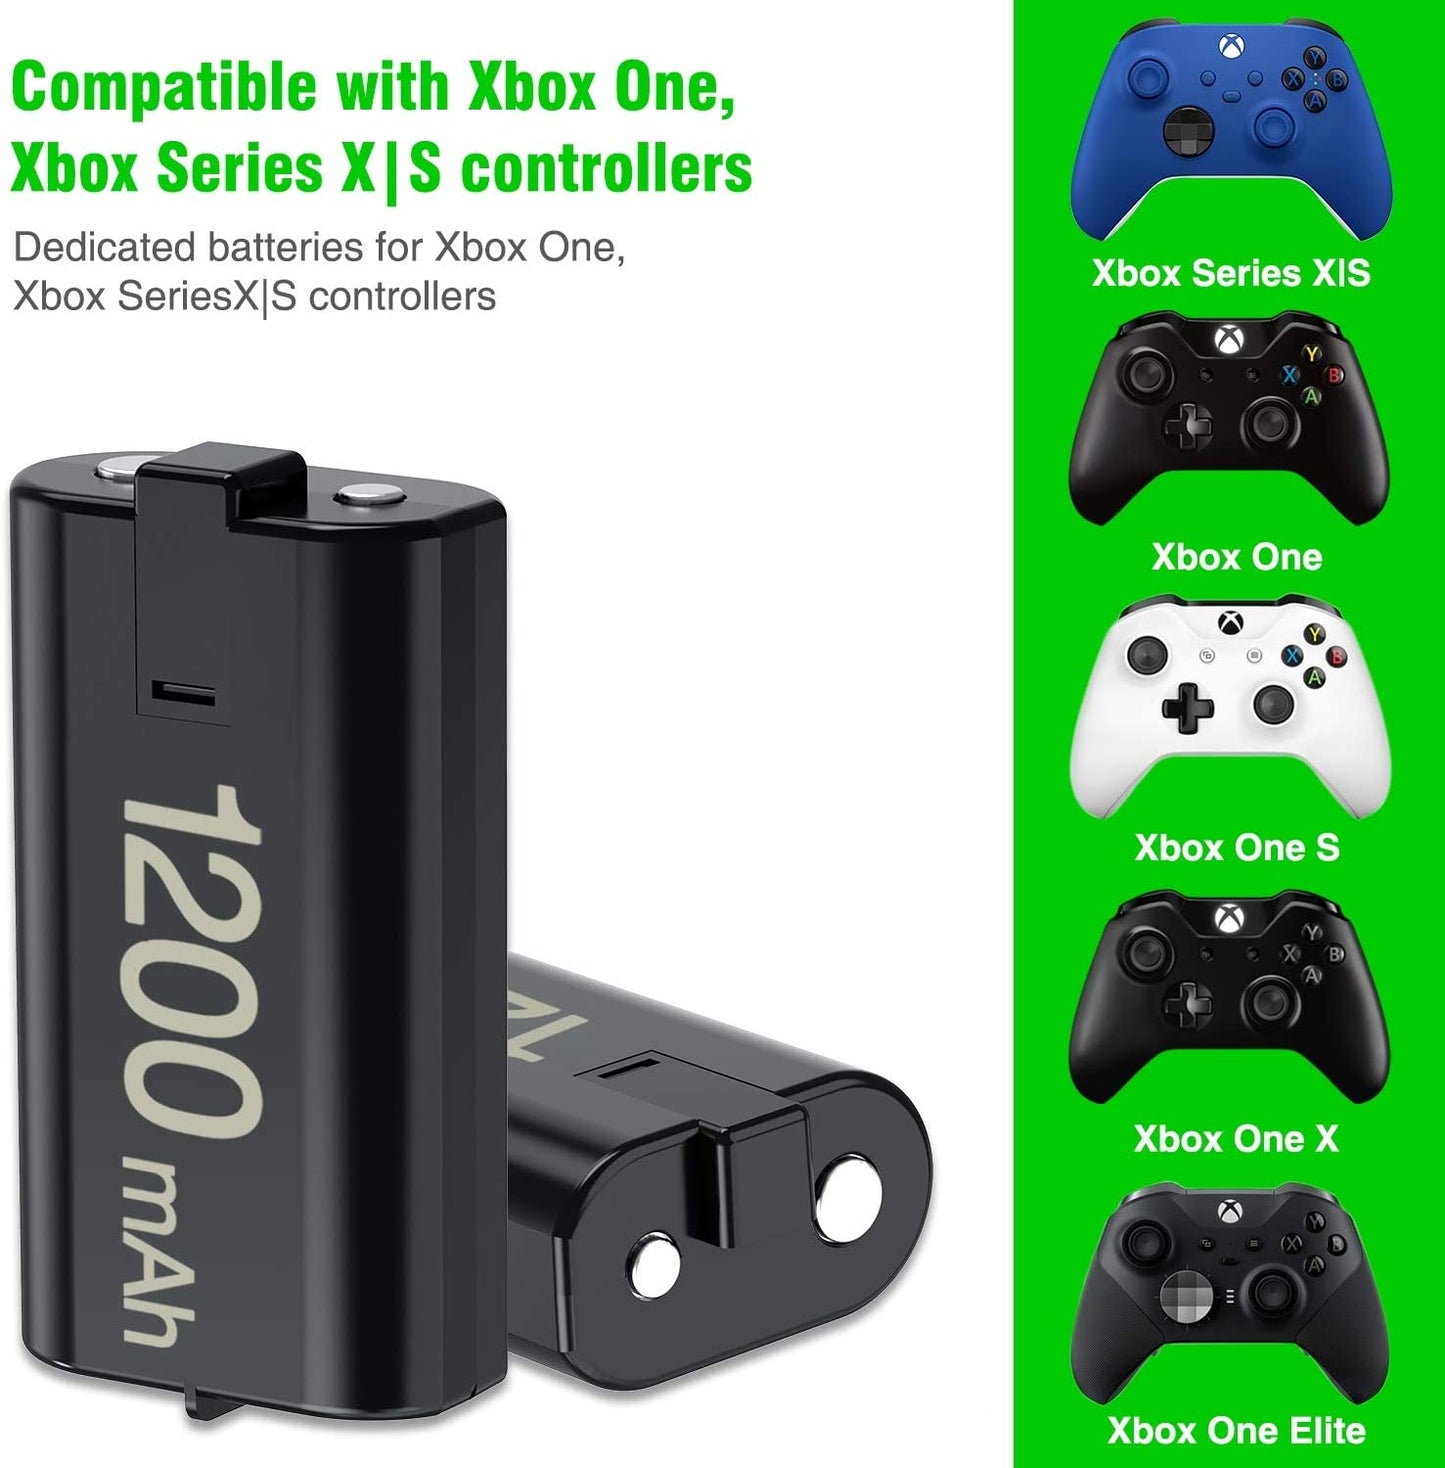 USB Rechargeable Battery Pack for Gaming Controllers